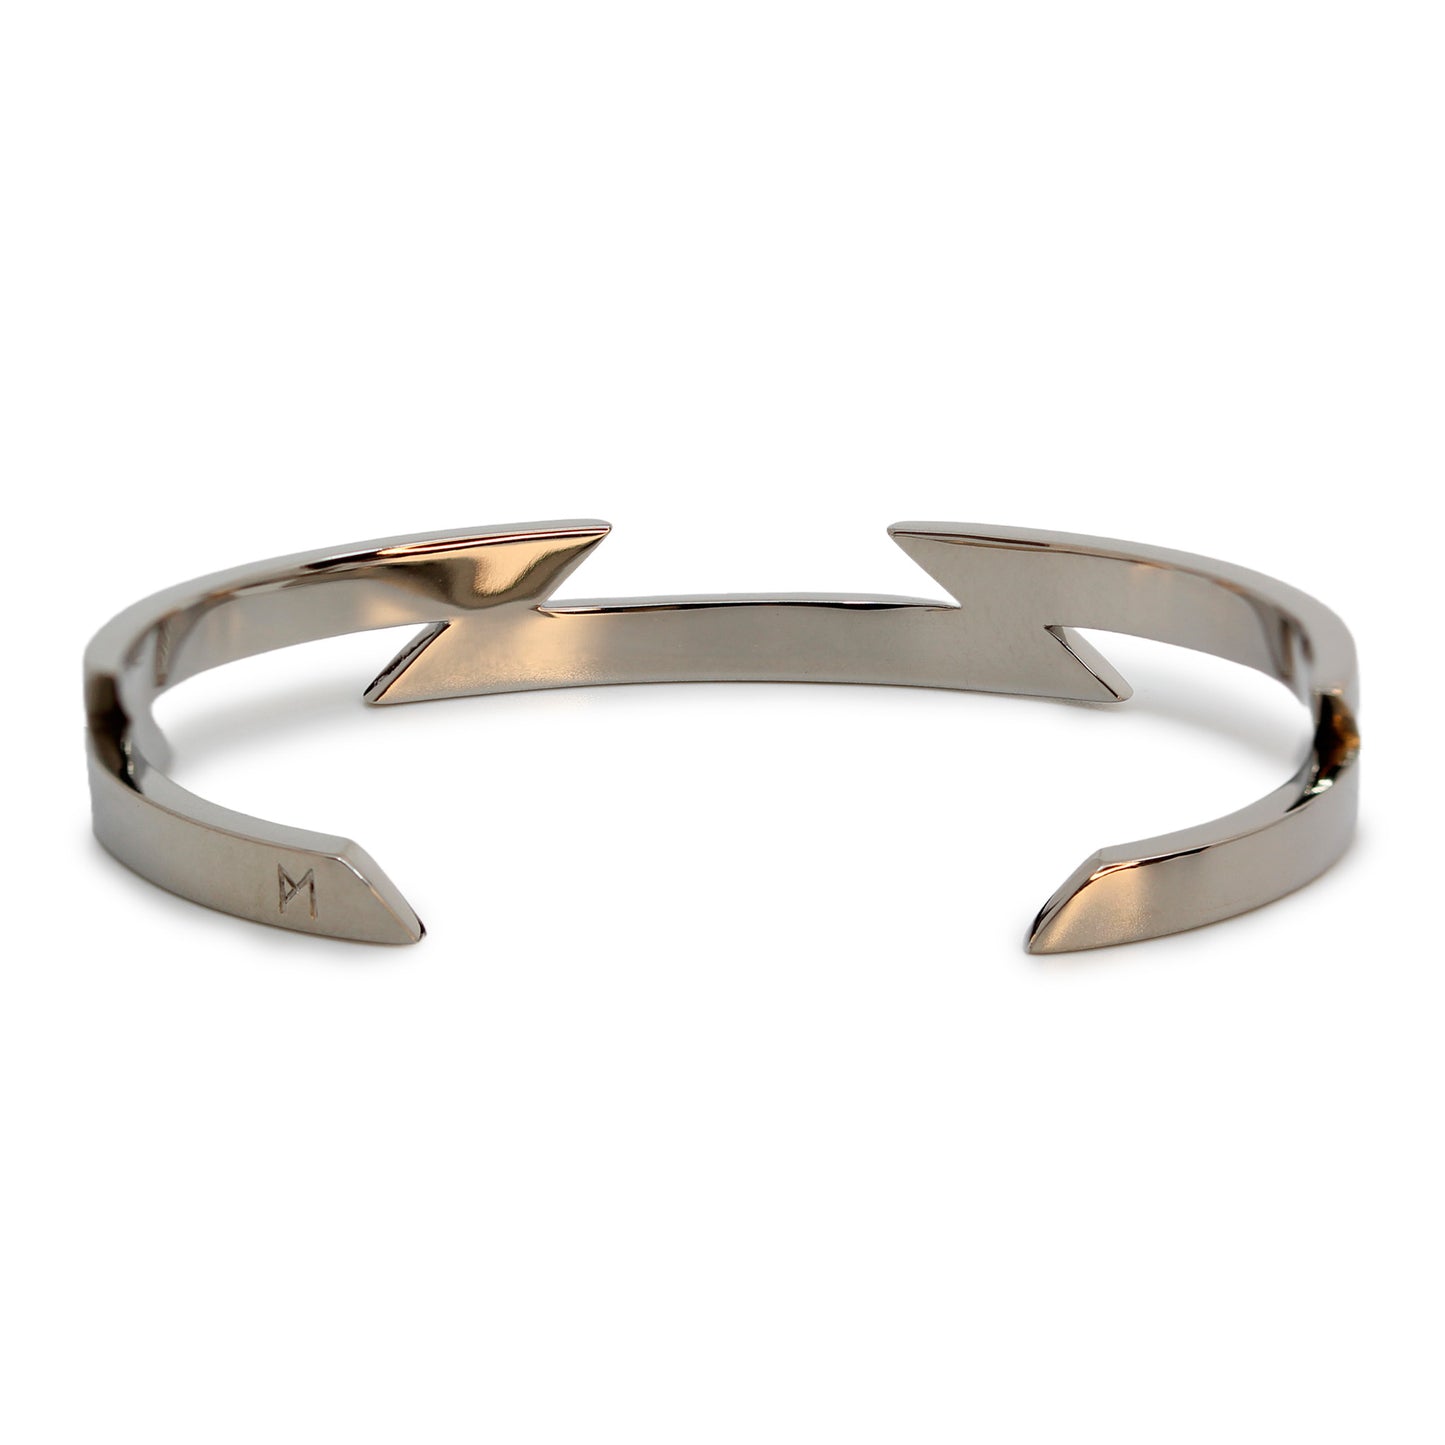 Single silver-colored titanium bangle with zig-zag pattern, 1 cm thick. Image shows back view of bangle.